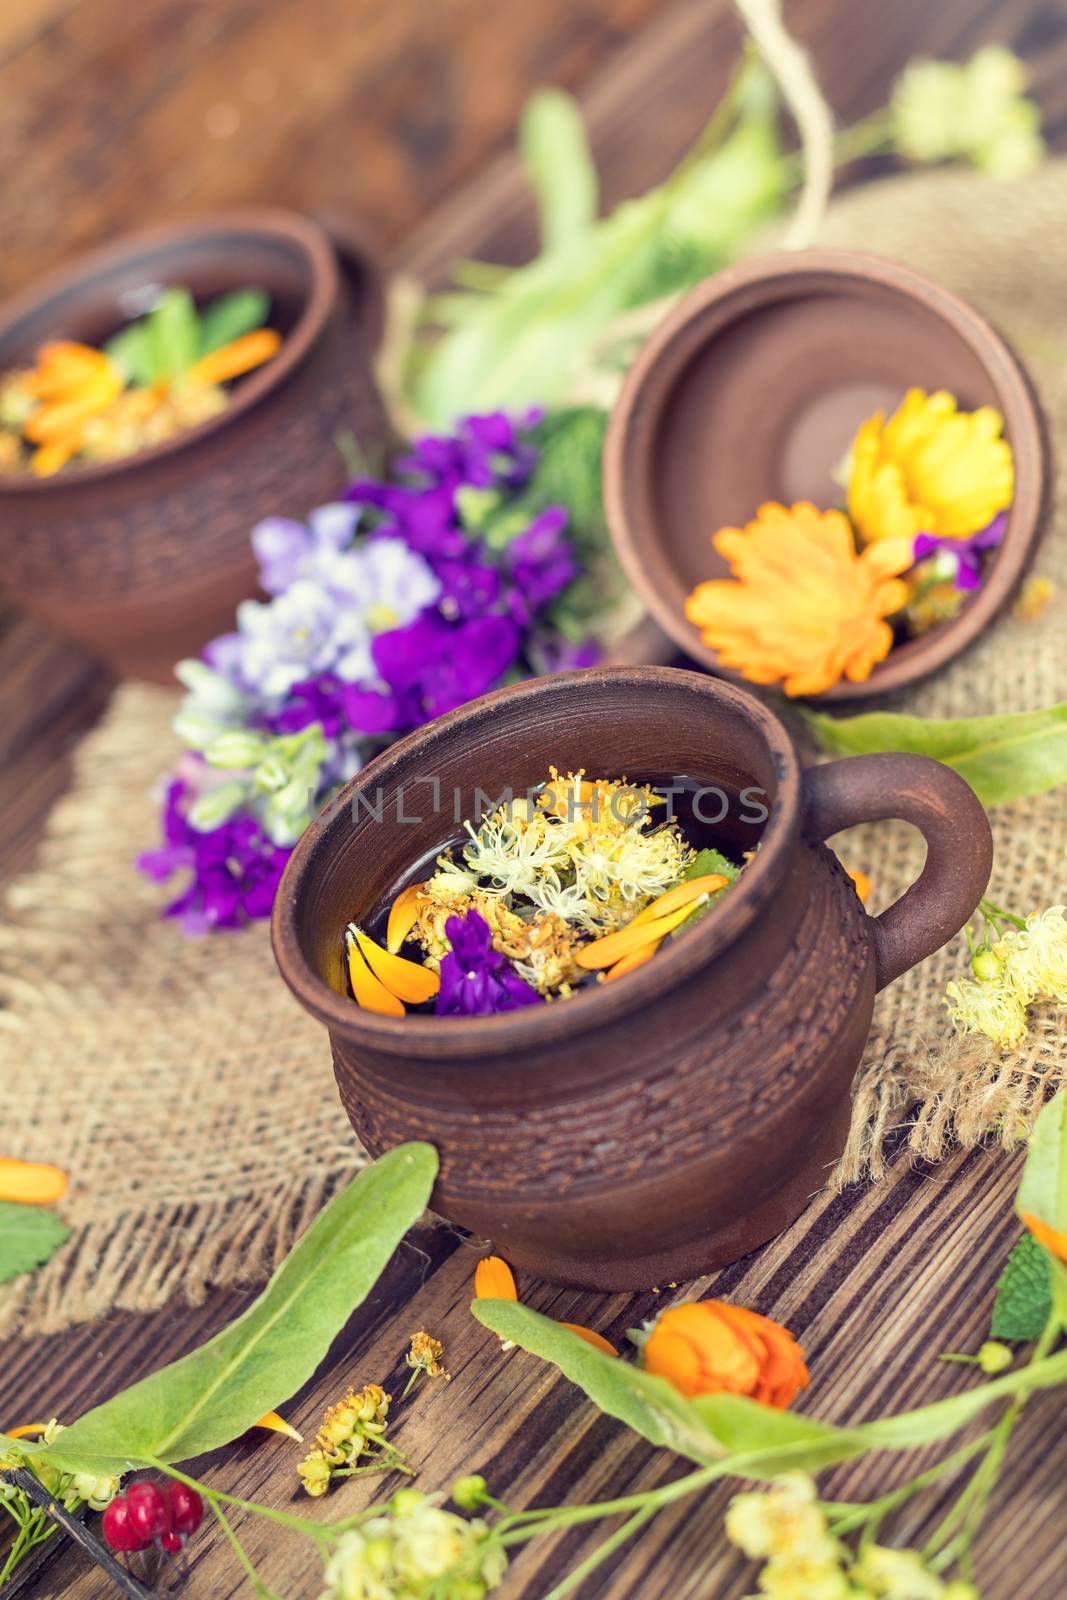 Two ceramic cups of healthy herbal tea with decoction of dry and fresh flowers on dark aged rustic wooden background. Shallow depth of field.